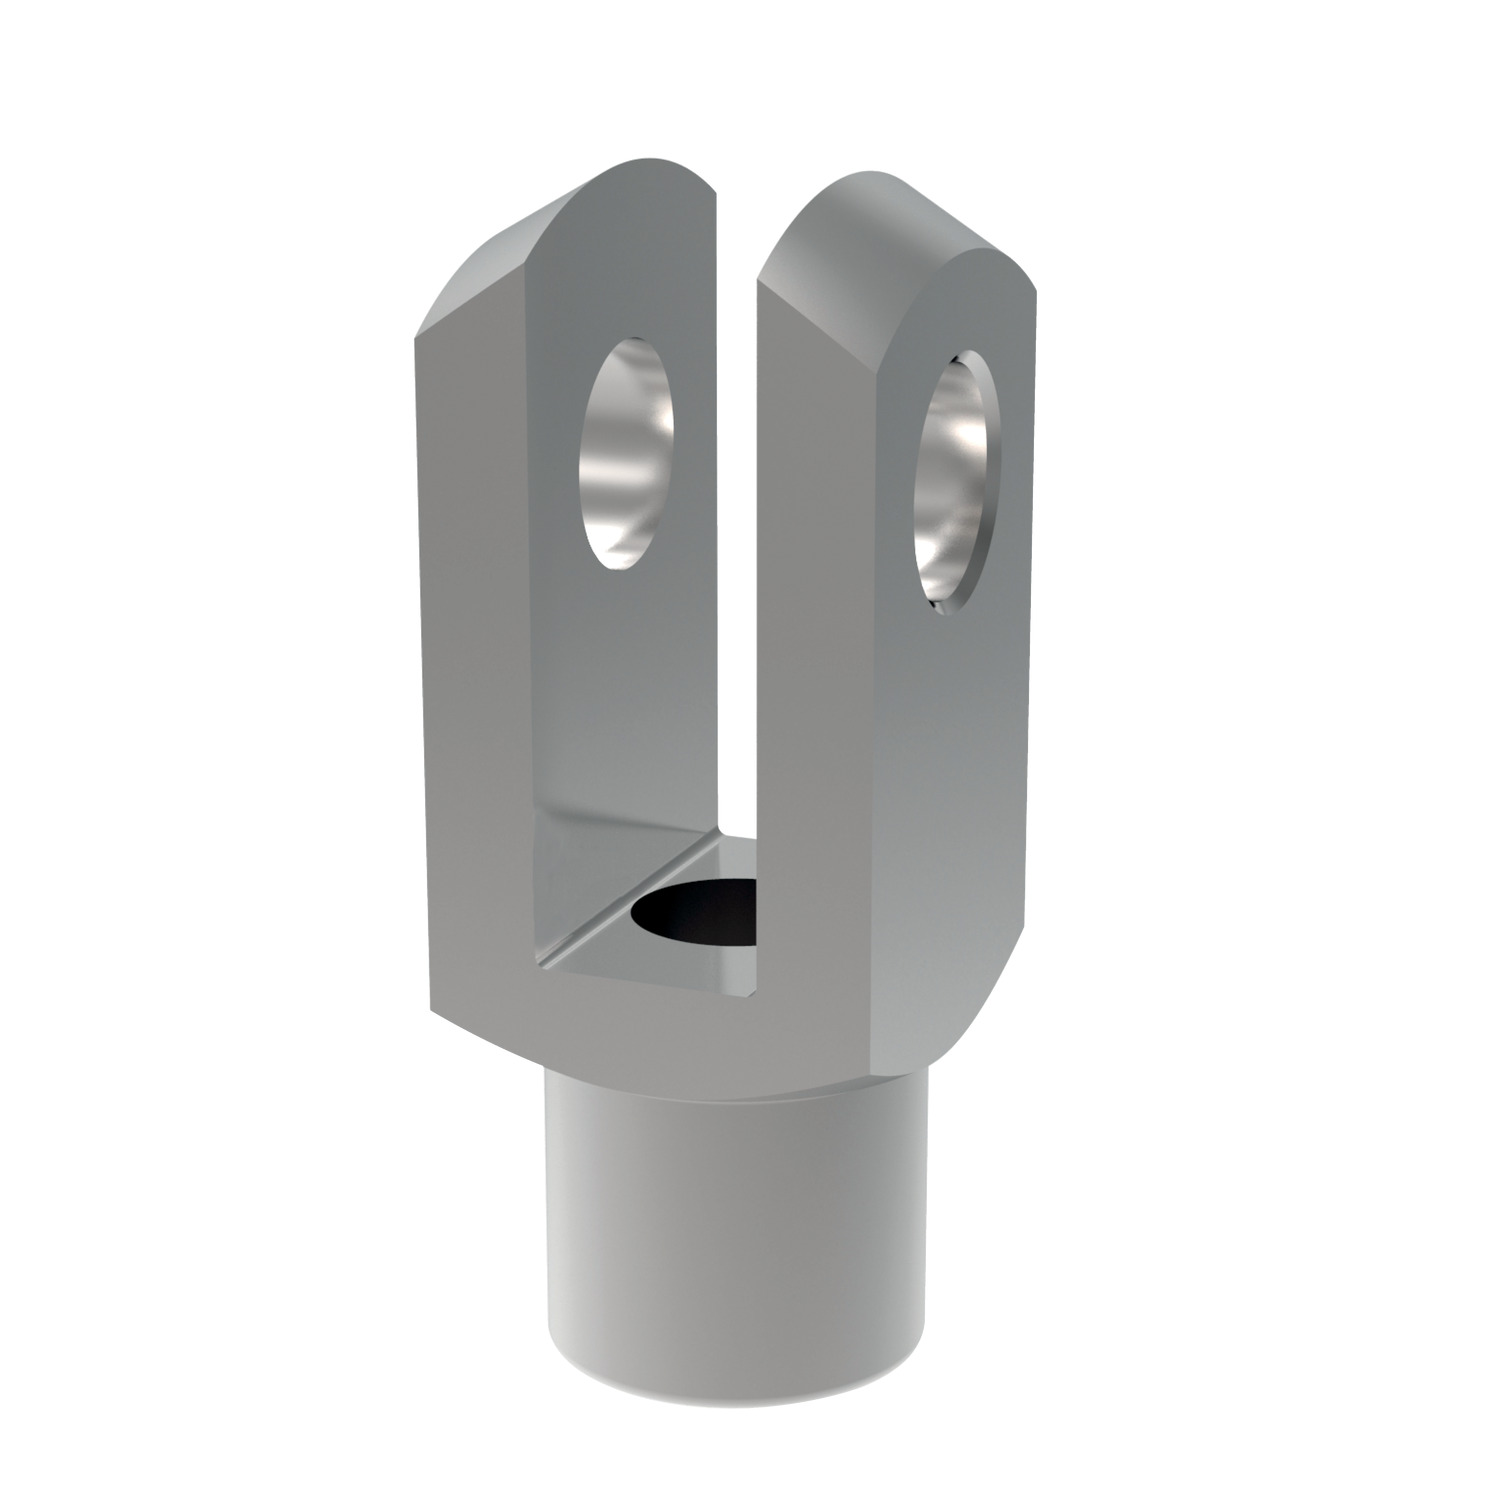 Steel Clevis Joints Steel clevis joint to DIN 71752. Also available in stainless steel (R3402) and left hand thread (R3386).